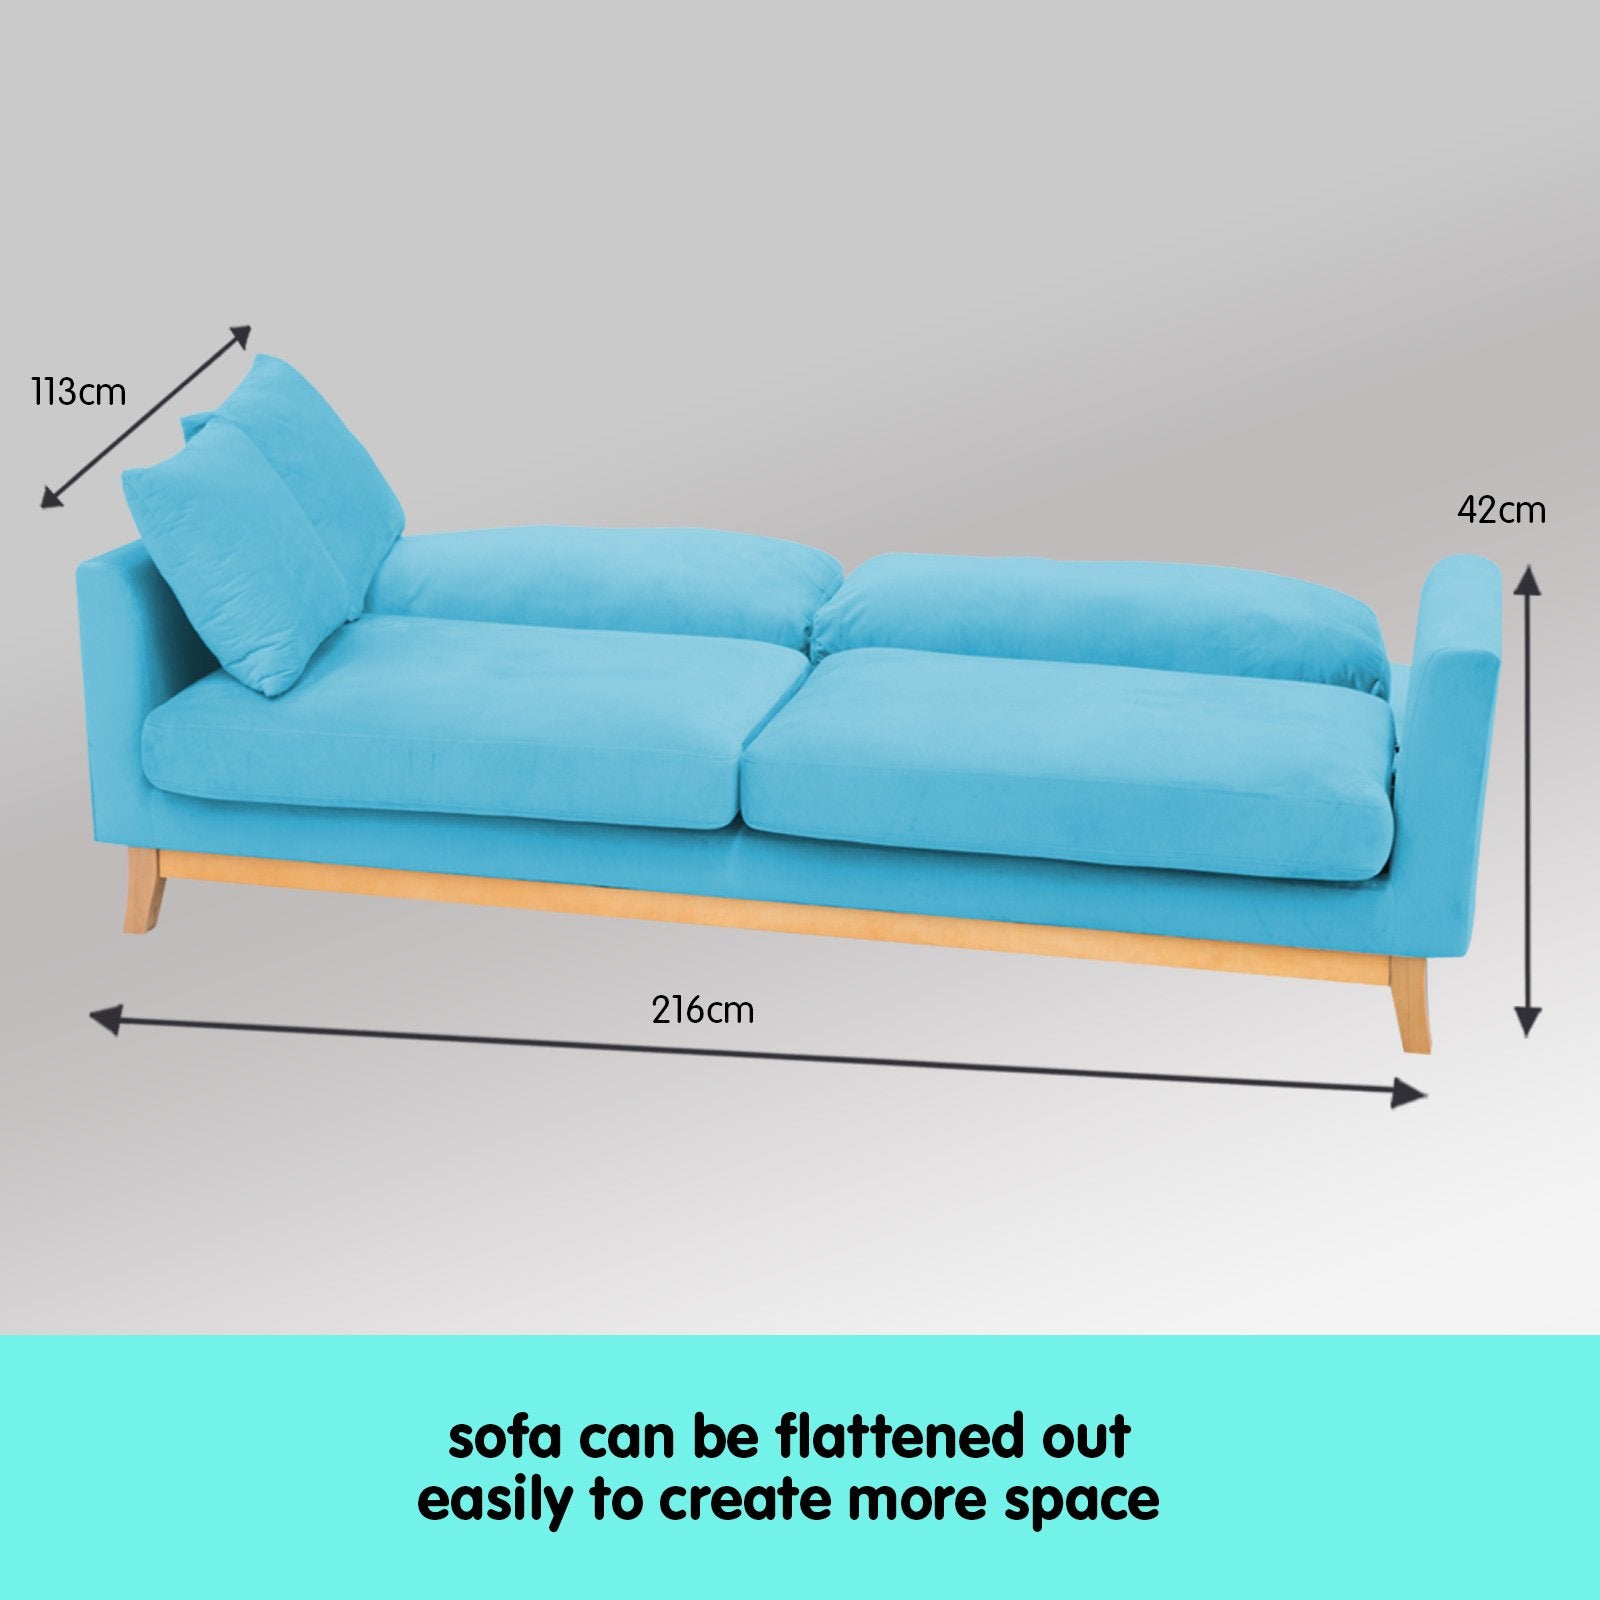 3 Seater Faux Velvet Wooden Sofa Bed Couch Furniture - Blue